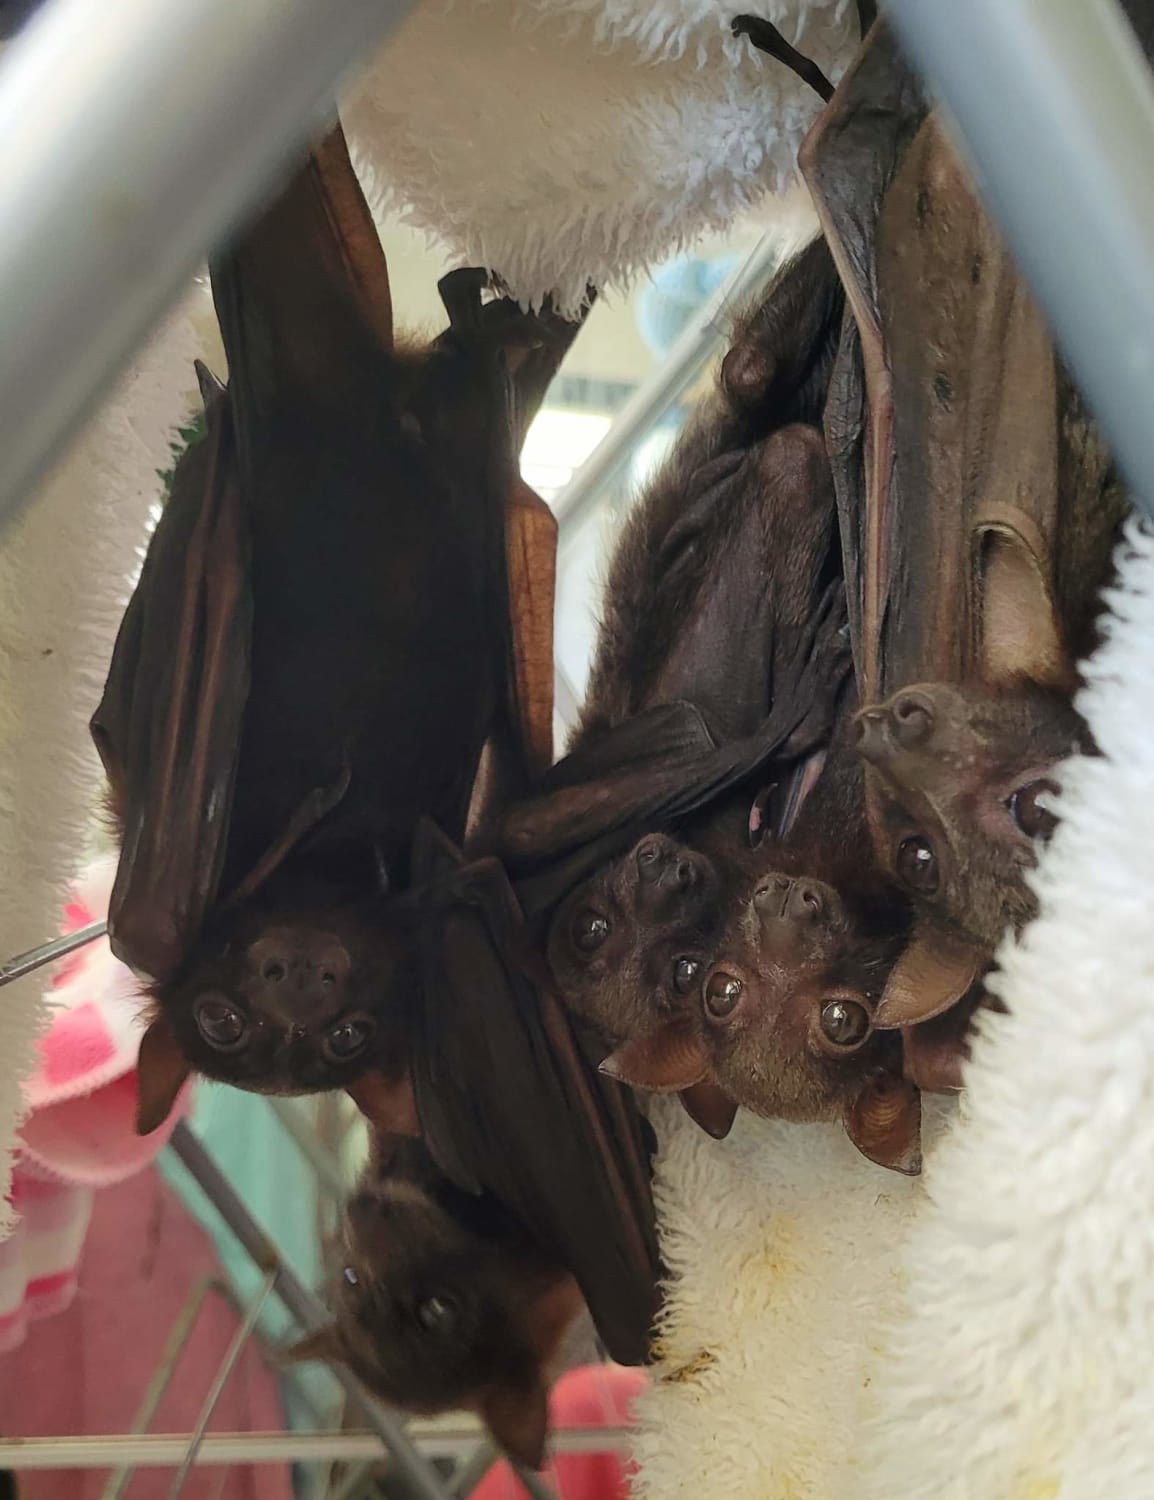 Rescued red fruit bats hanging out together. Unlike black fruit bats who always stay a body length apart, reds are well known to break branches with too much weight of too many bats huddled close together. (Insert social distancing joke here)